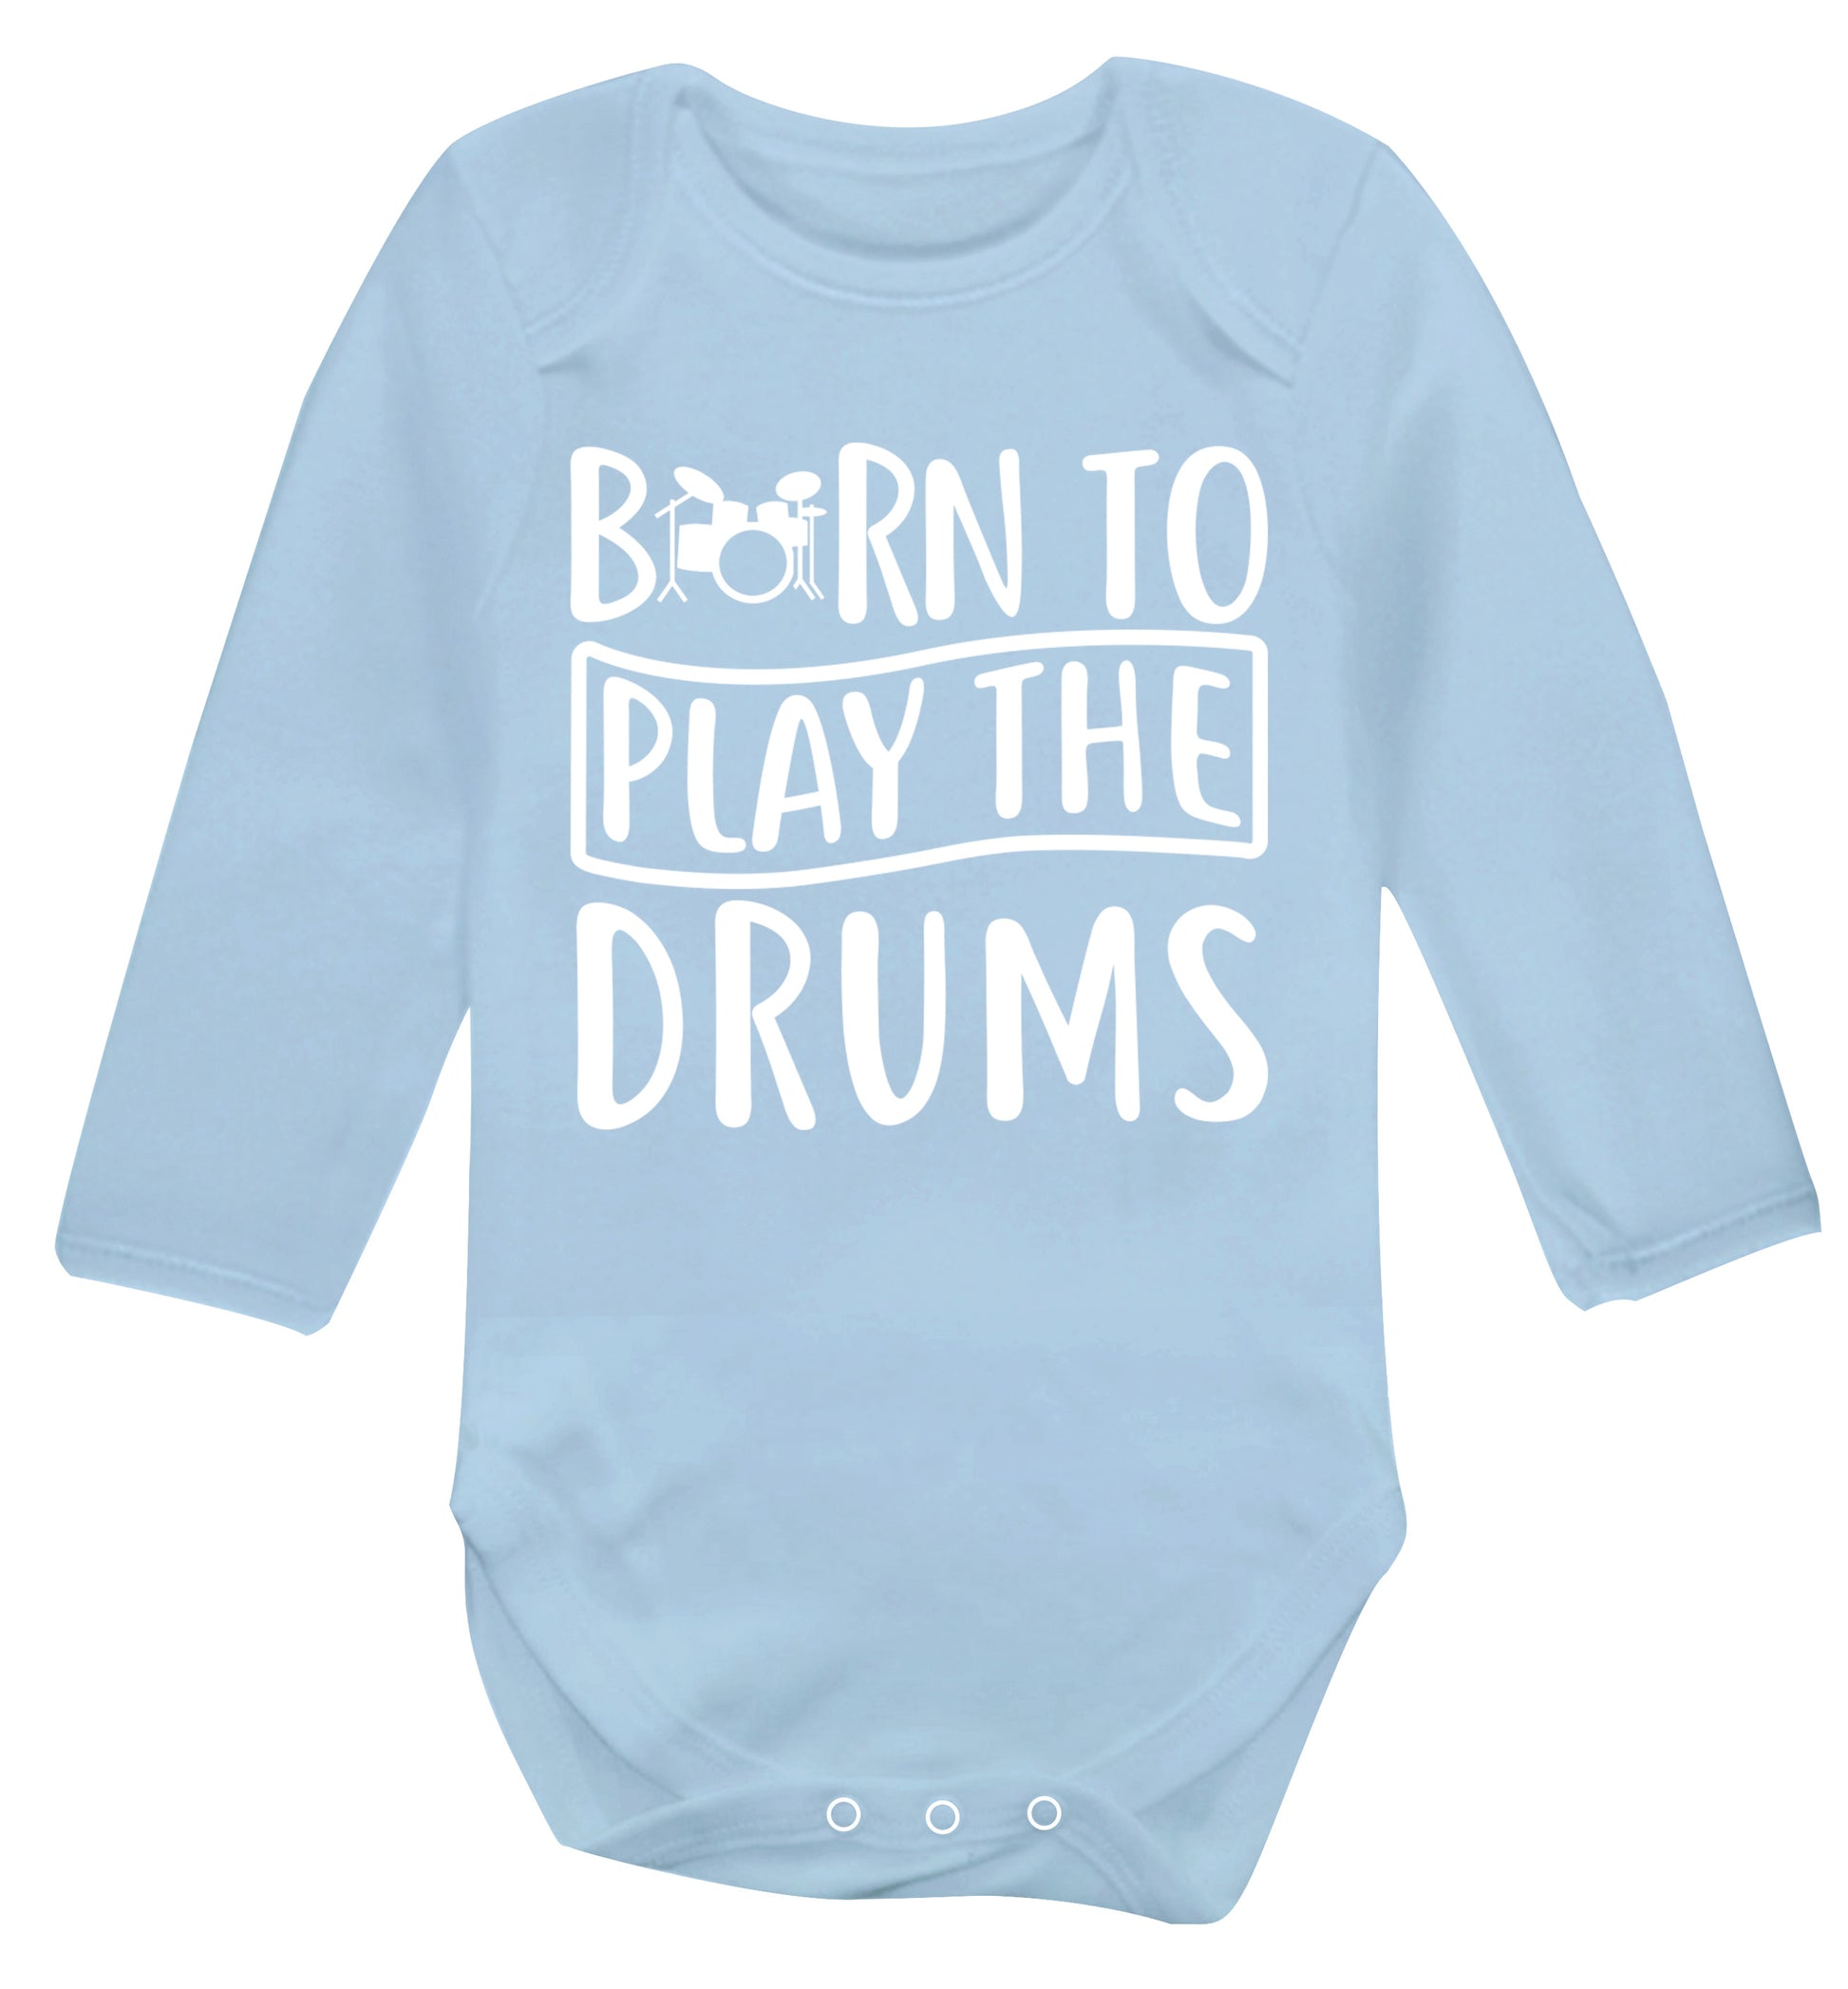 Born to play the drums Baby Vest long sleeved pale blue 6-12 months